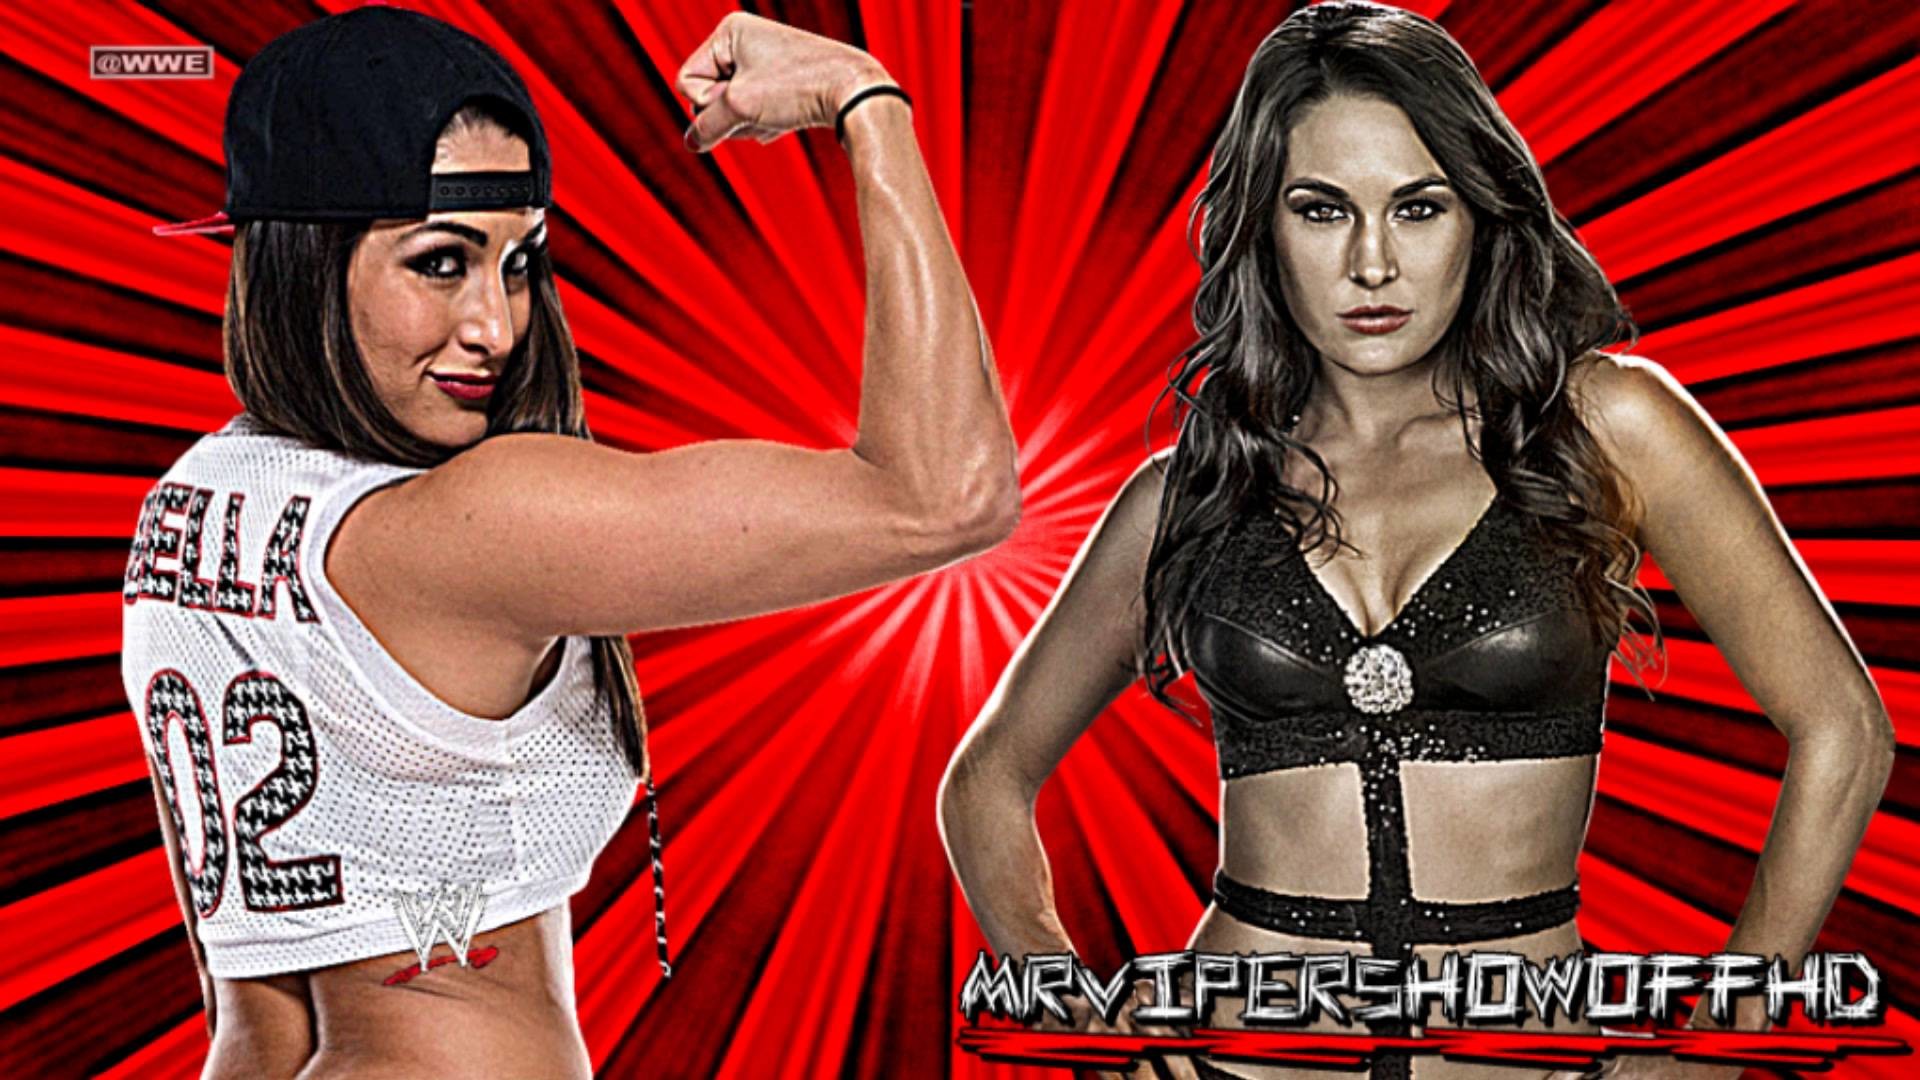 1920x1080 2010-2014: The Bella Twins 3rd WWE Theme Song - You Can Look (But You Can't  Touch) (HQ + DL)